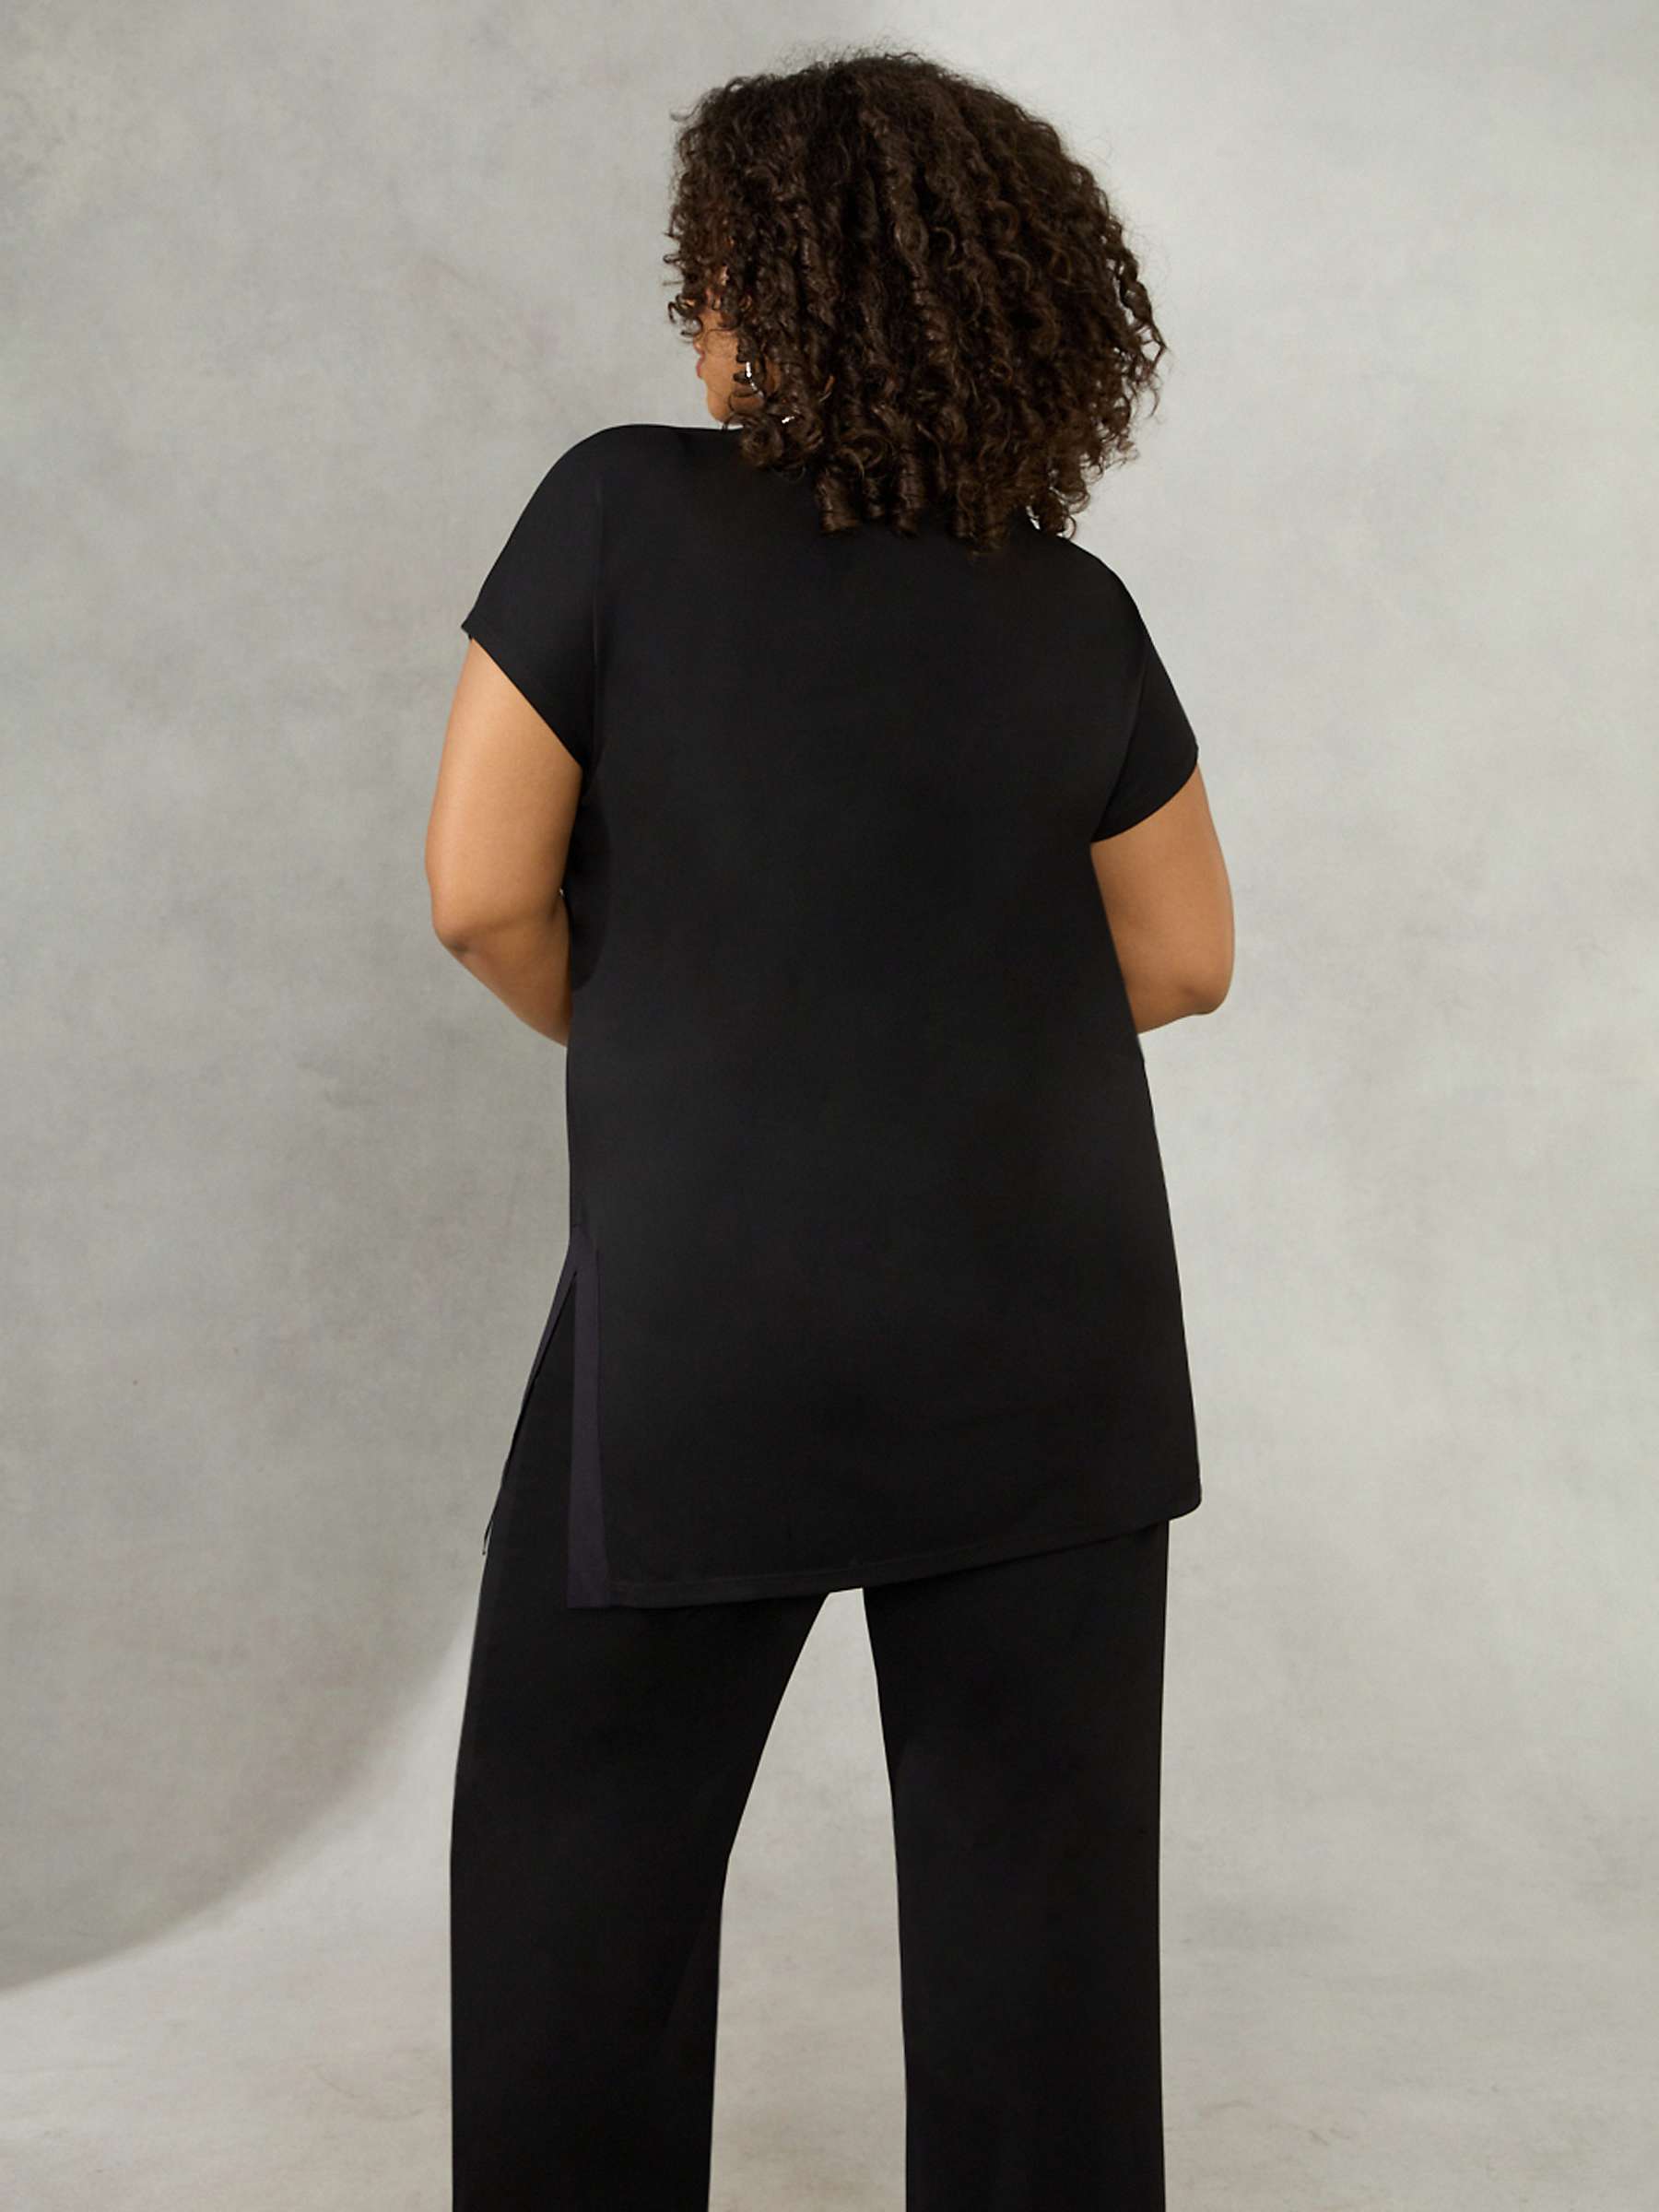 Buy Live Unlimited Curve Bootleg Trousers, Black Online at johnlewis.com